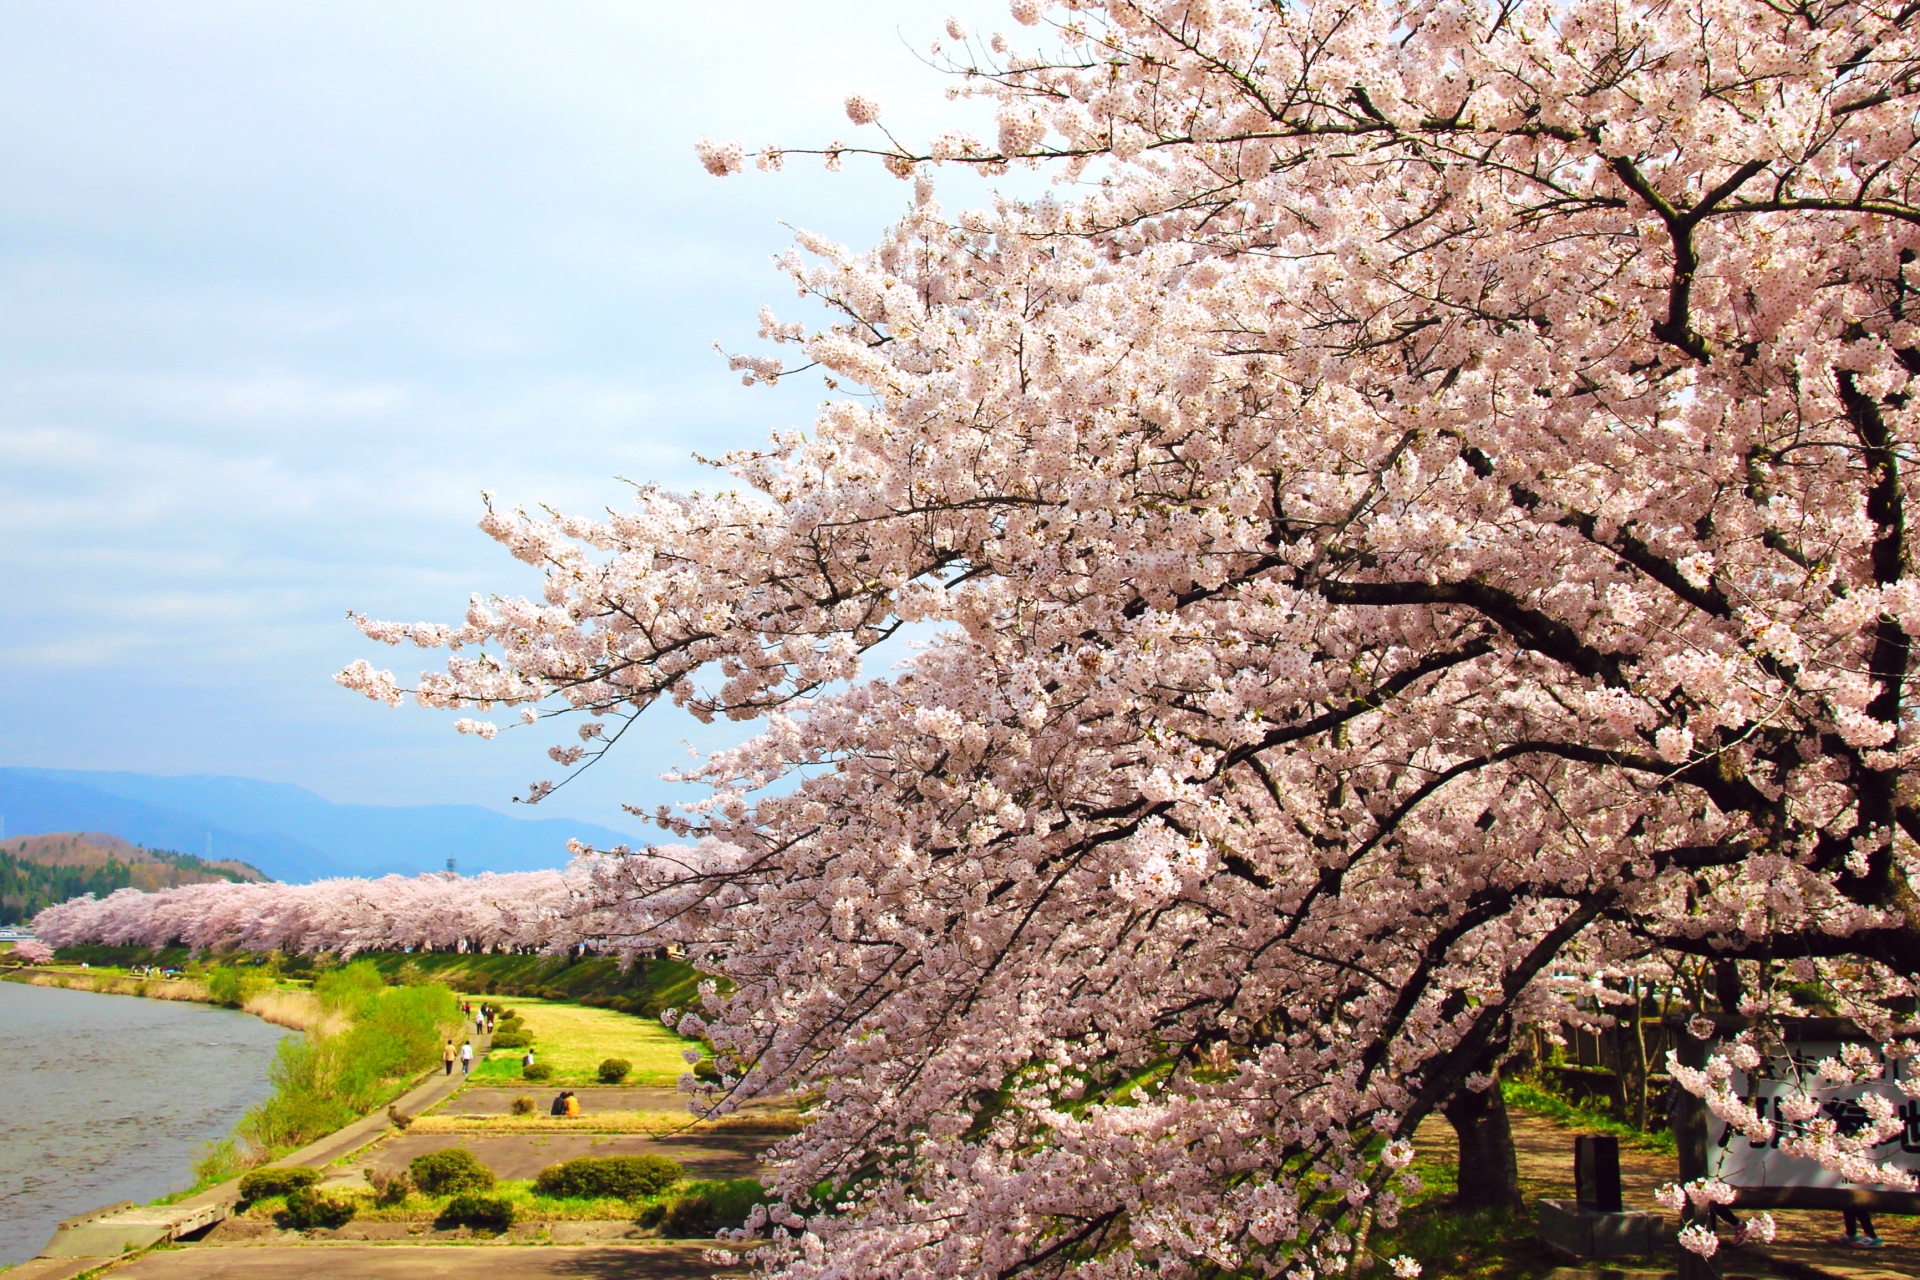 Cherry blossom trees on the bank of Hinokinai River in Kakunodate.